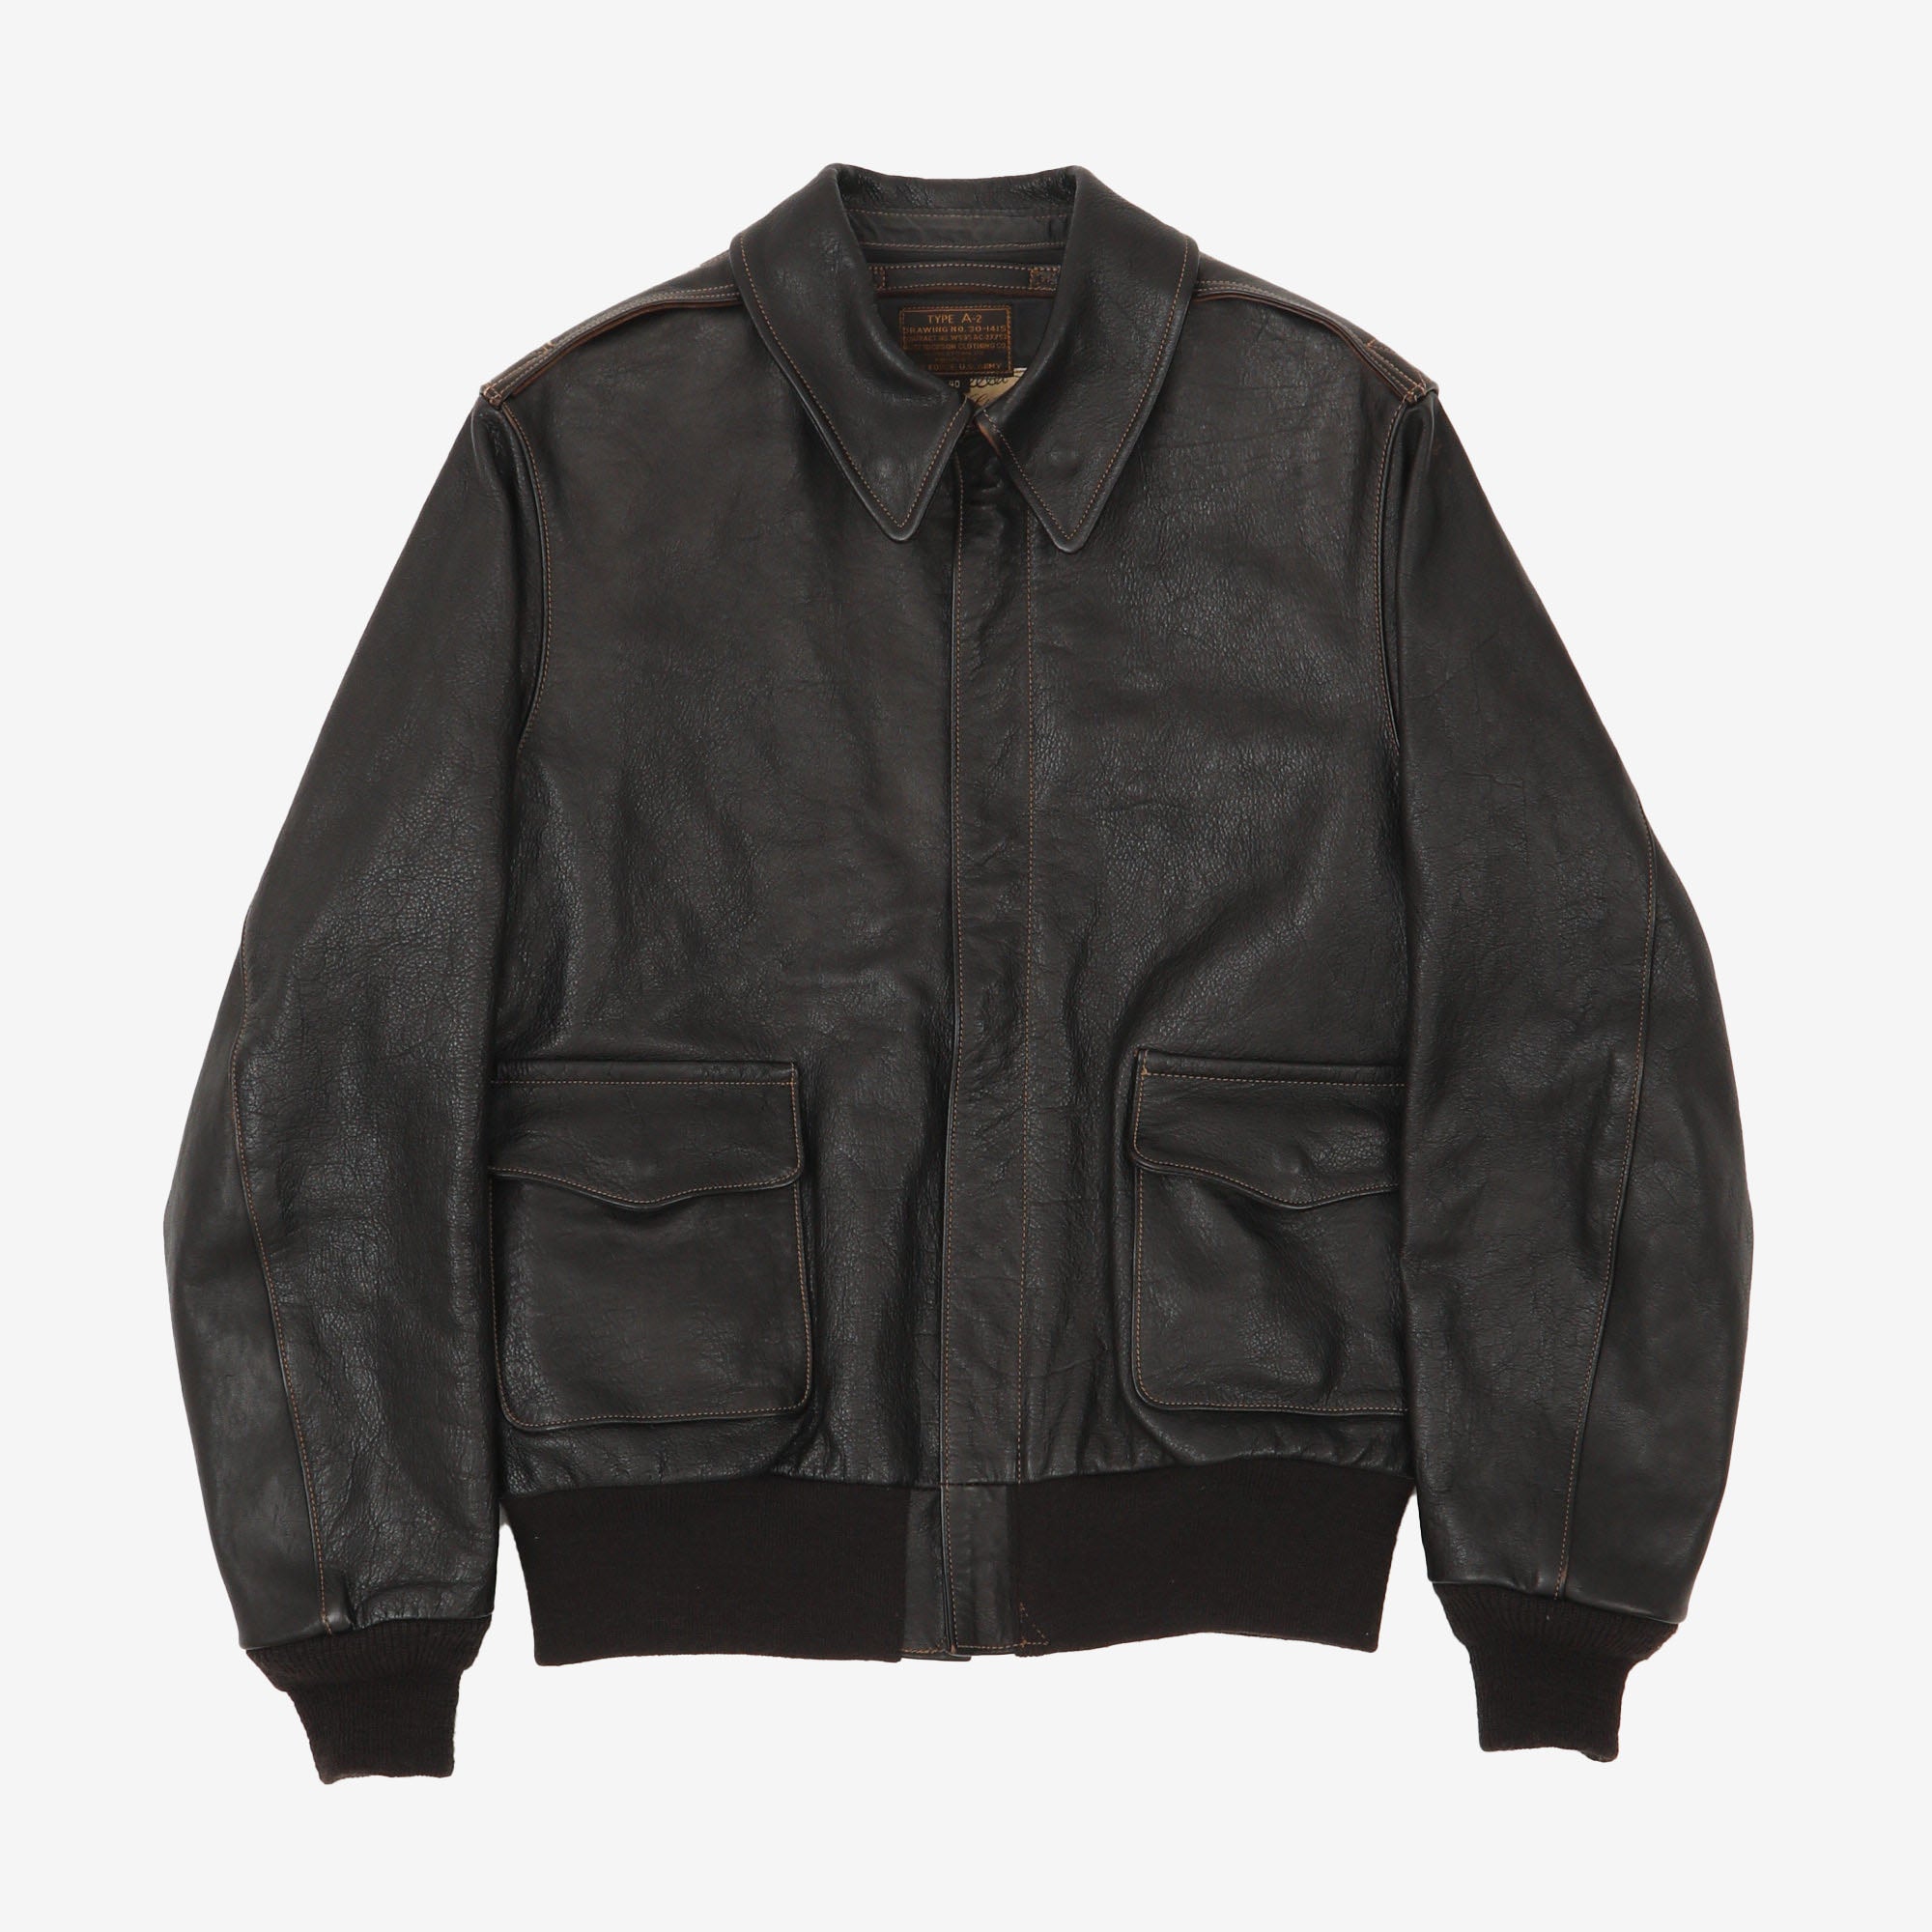 William Gibson A-2 Jacket